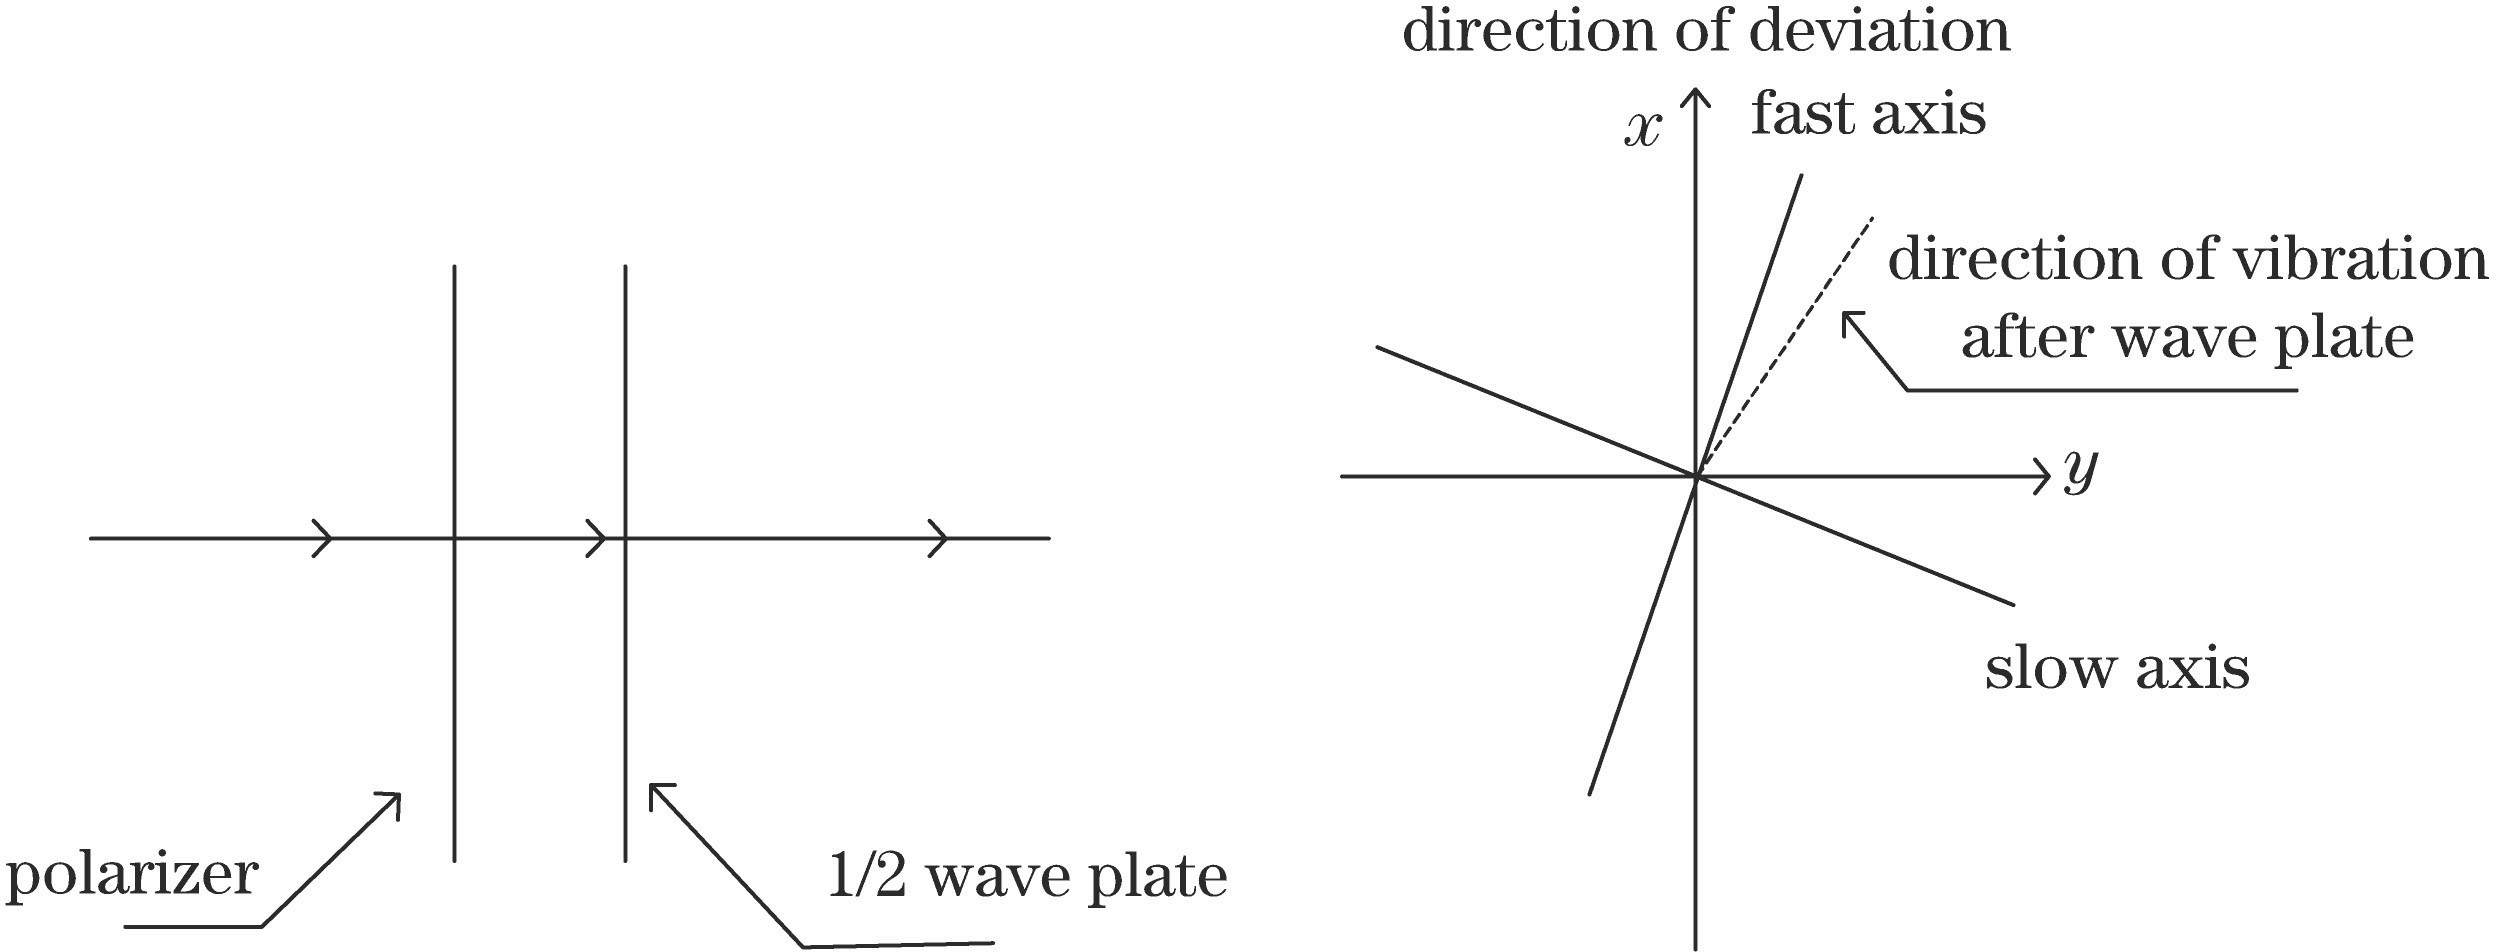 Vibration direction changes of incident light after passing through polarizer and 1/2 wave plate